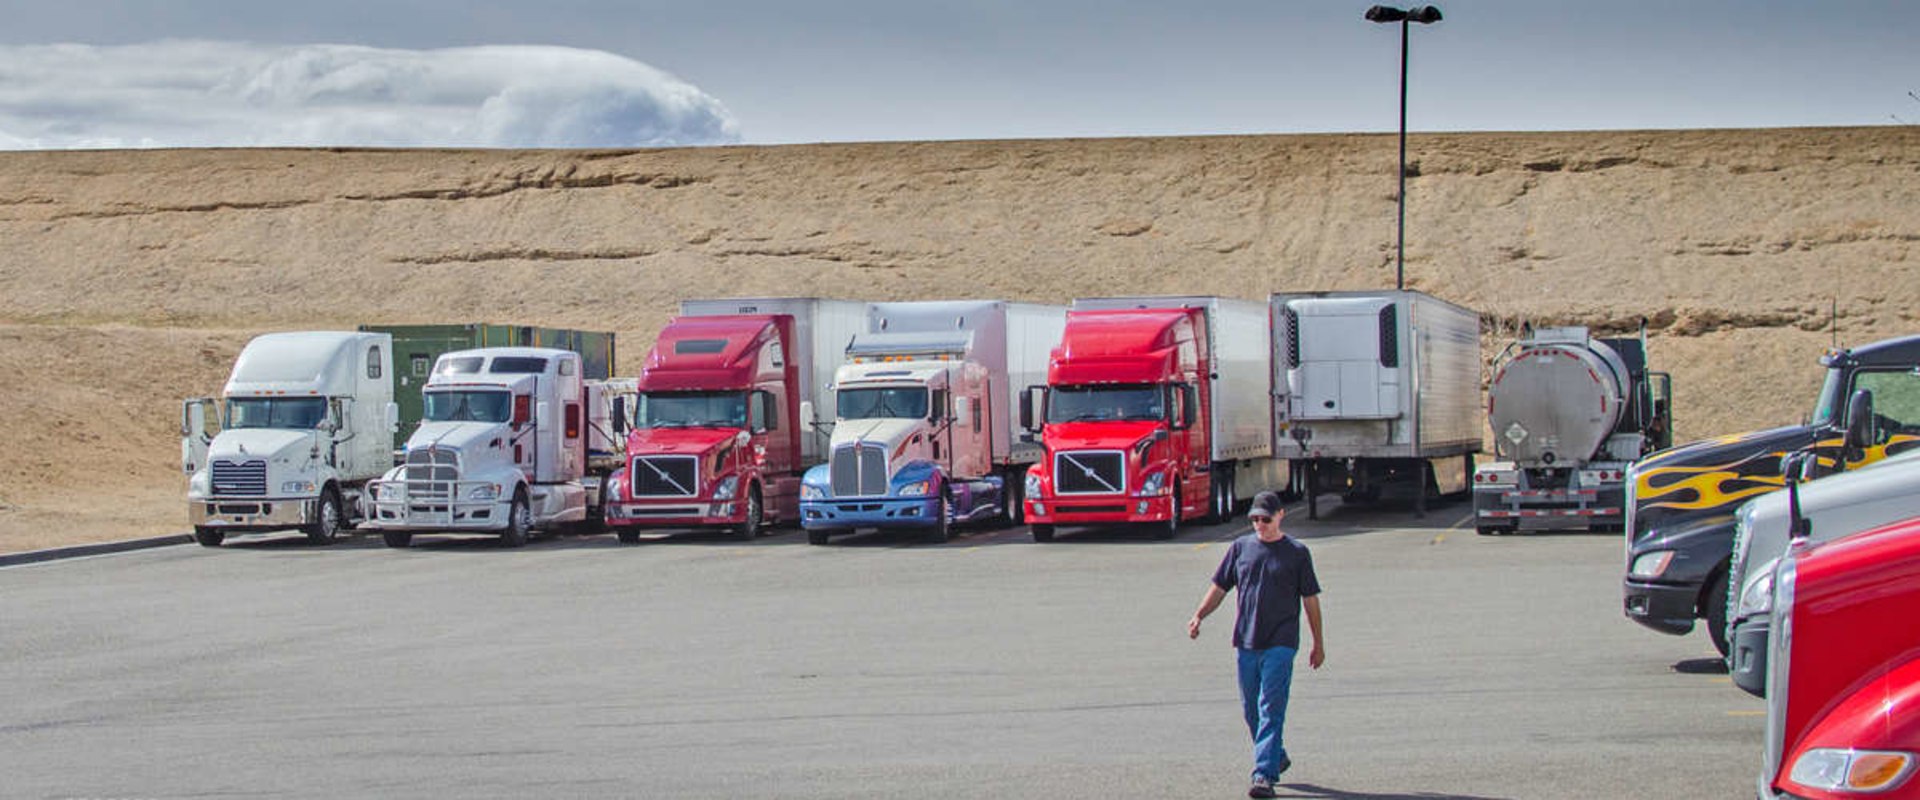 How profitable is a trucking company?